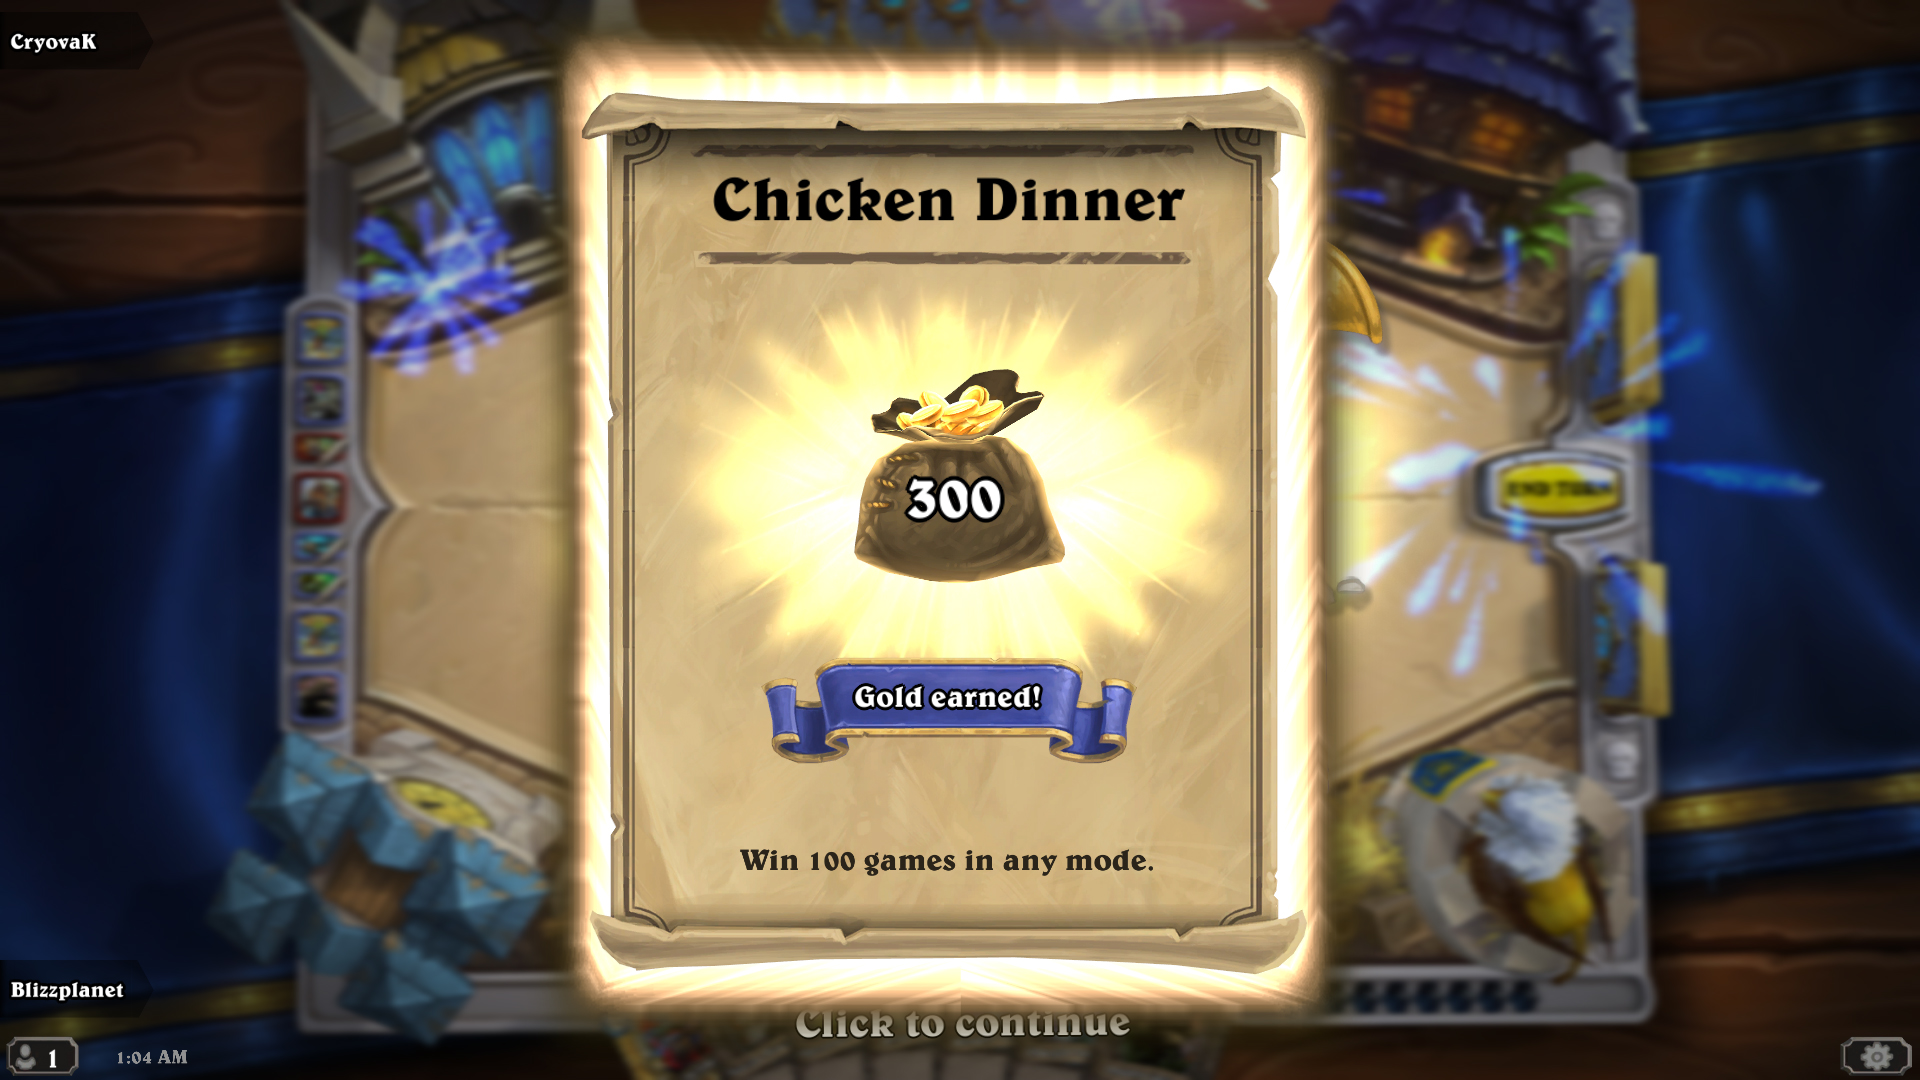 Hearthstone – Chicken Dinner Achievement – Win 100 Games in any Mode